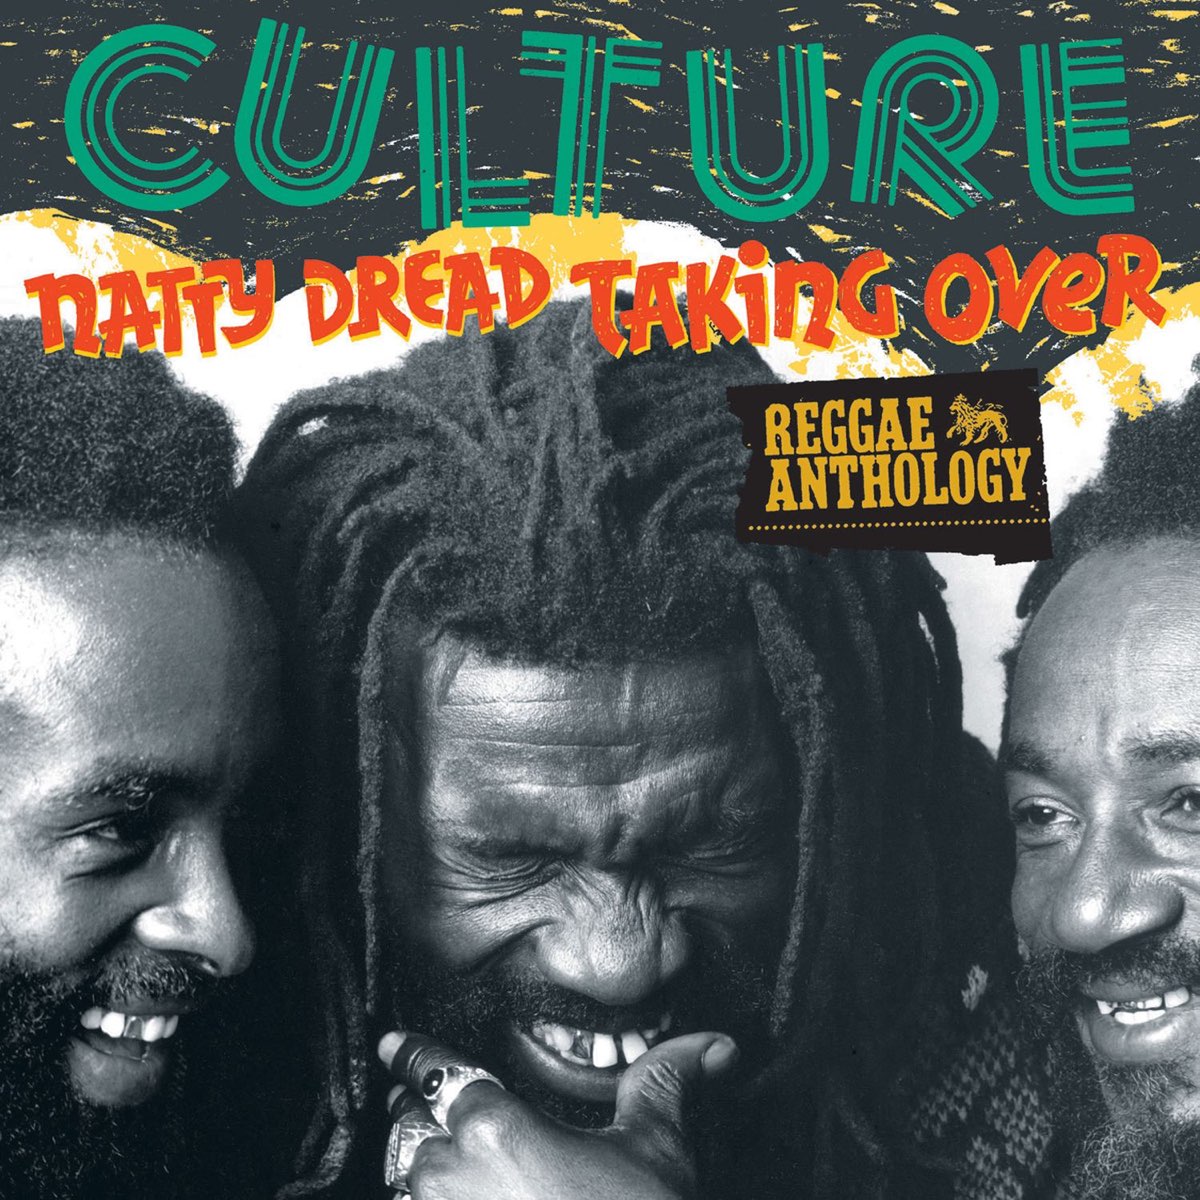 Reggae Anthology - Natty Dread Taking Over by Culture on Apple Music